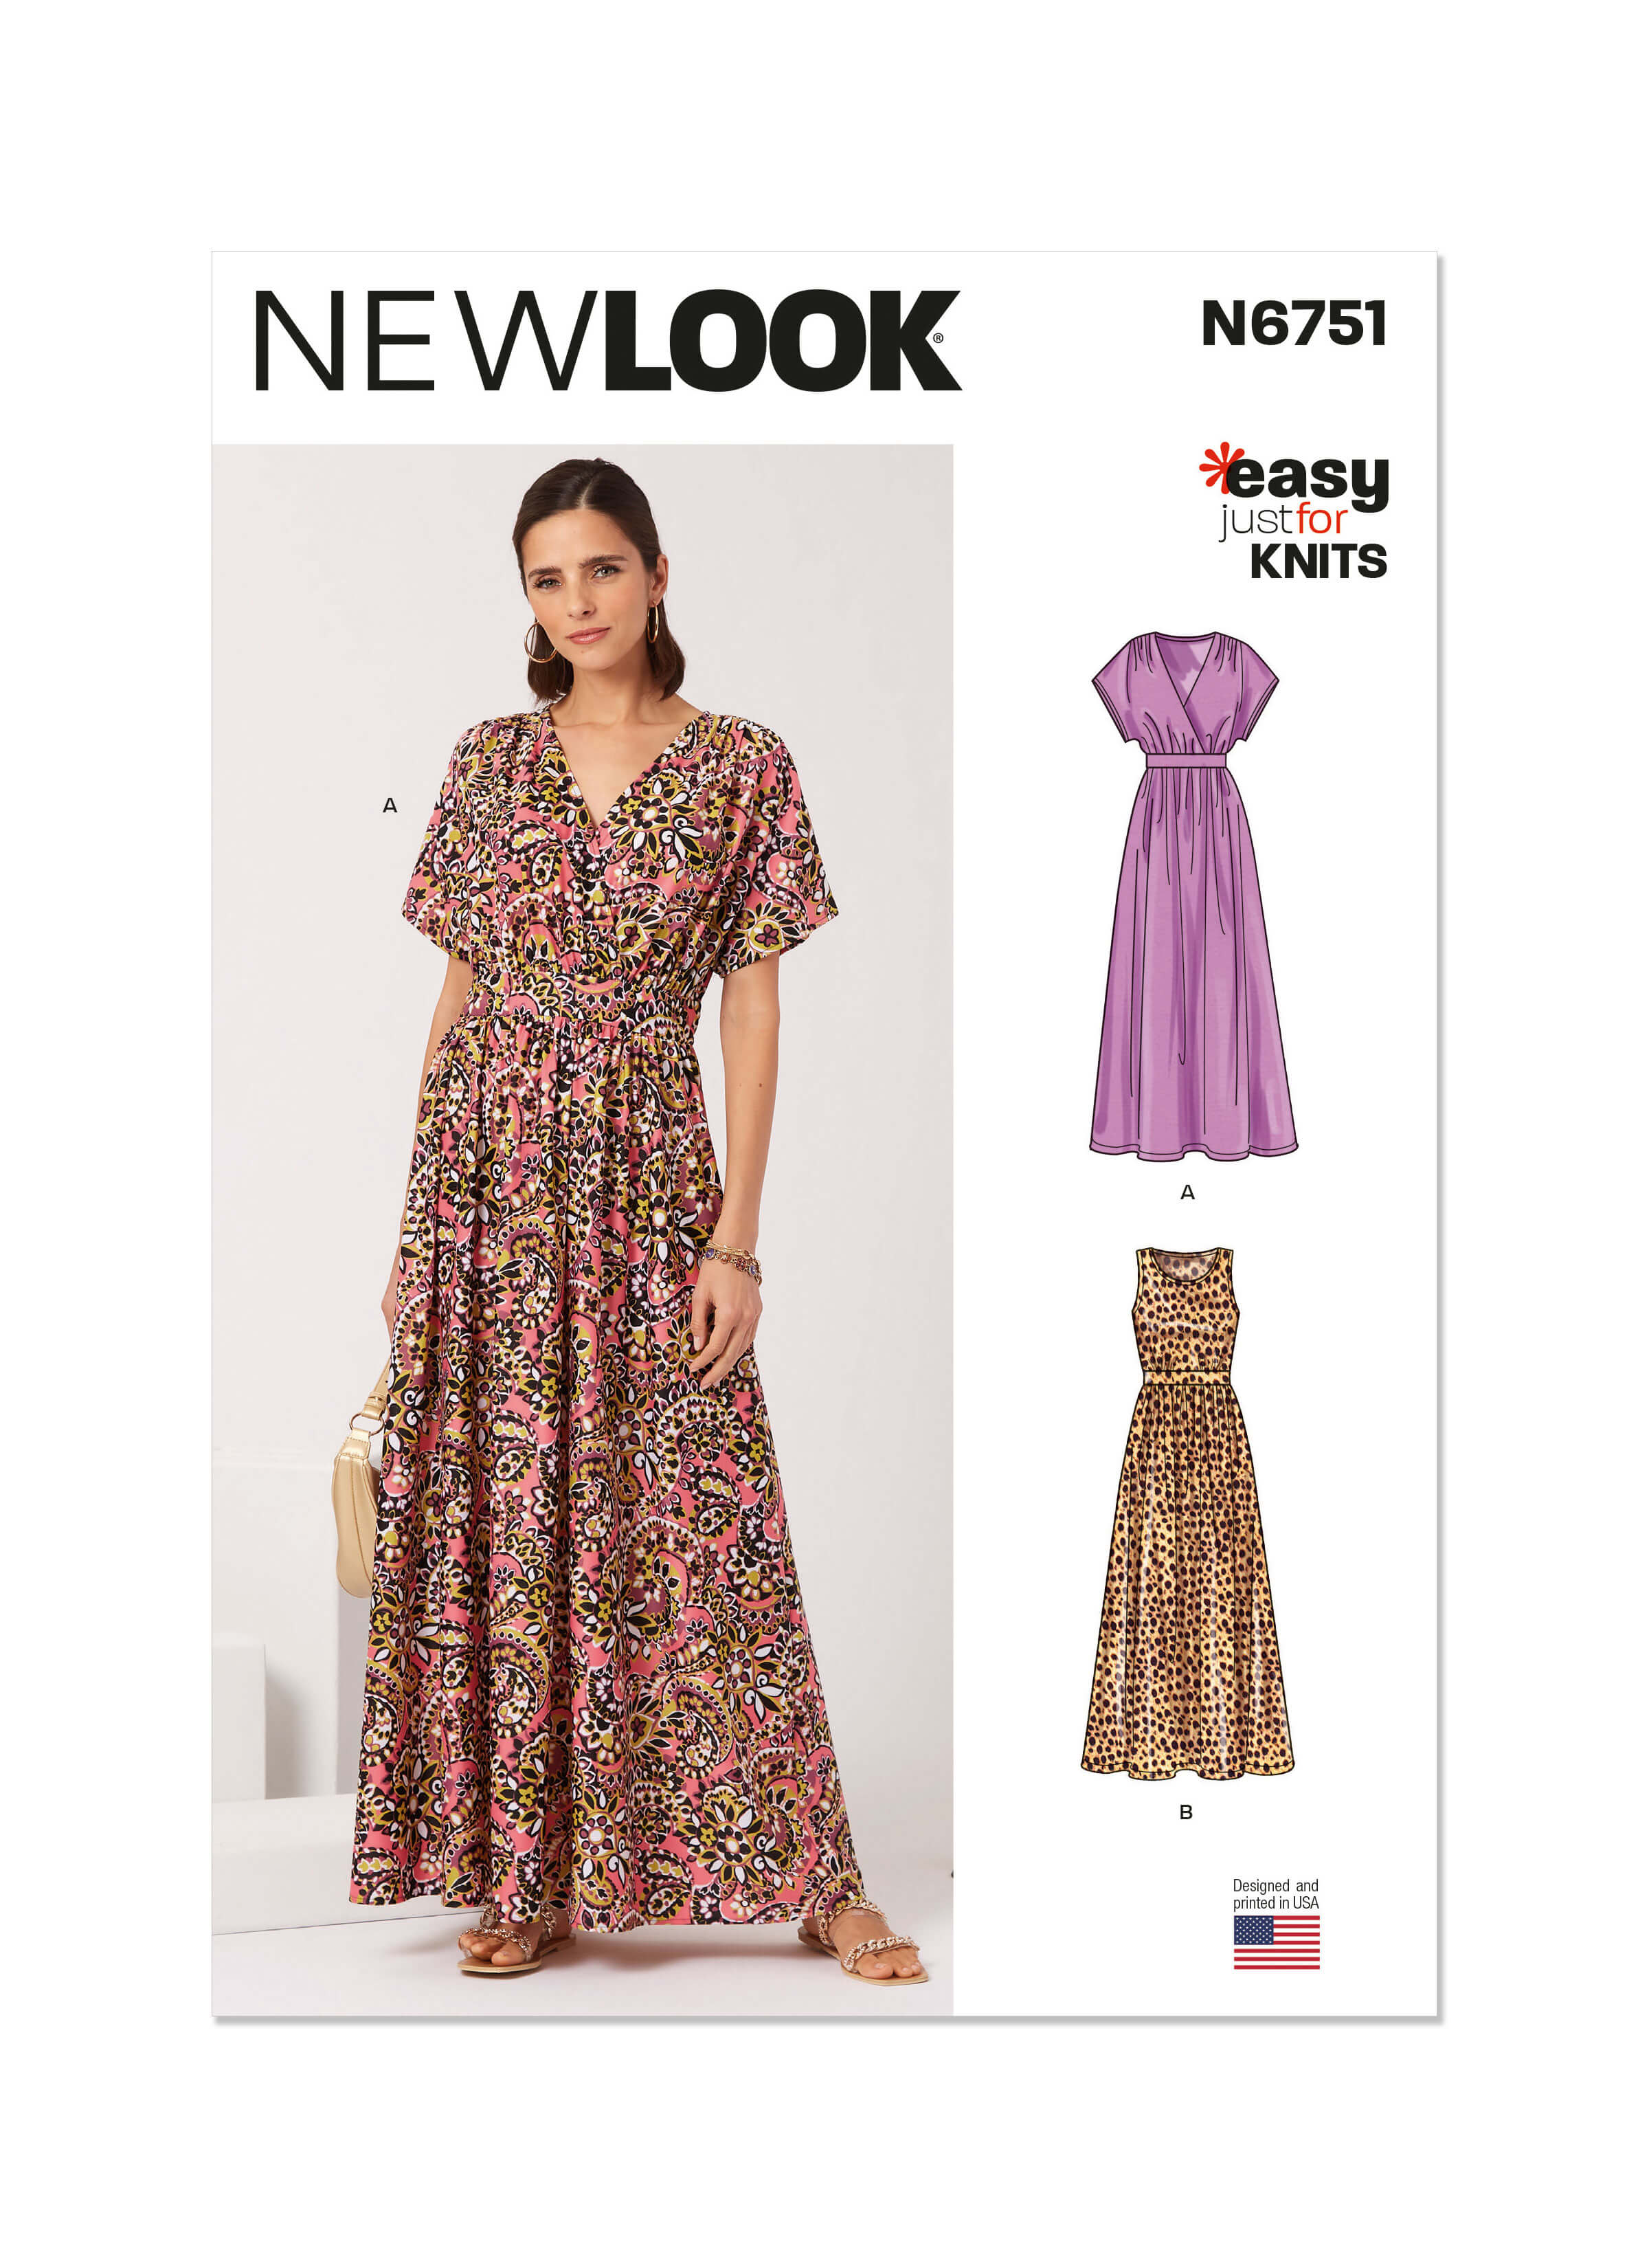 New Look Sewing Pattern N6751 Misses' Knit Dresses